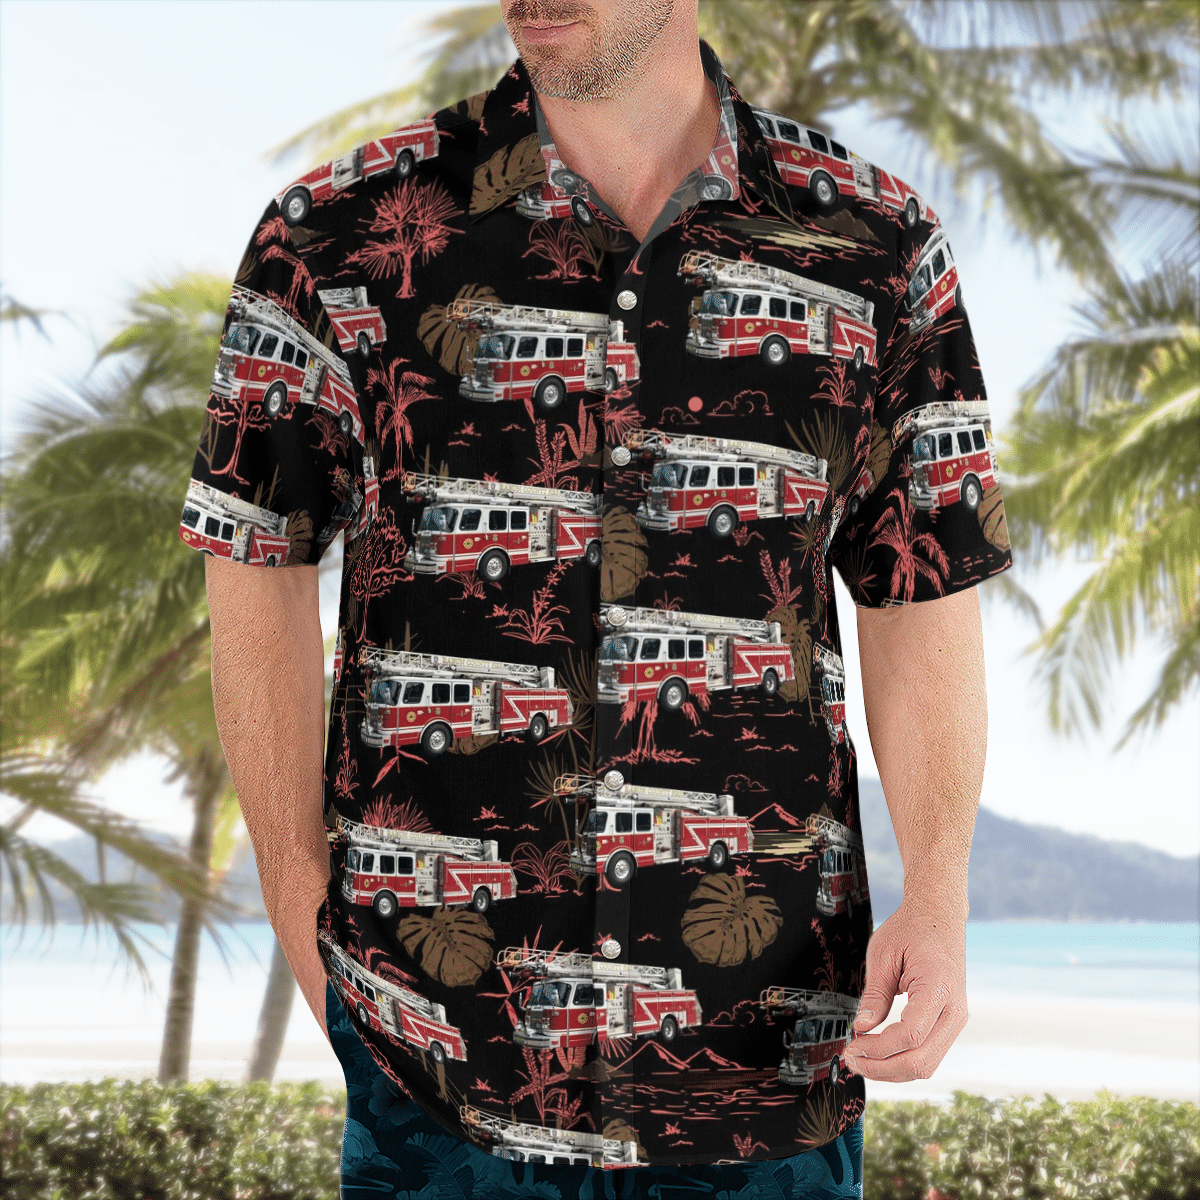 There are several styles of beach and Hawaiian shorts and tops to choose from 34